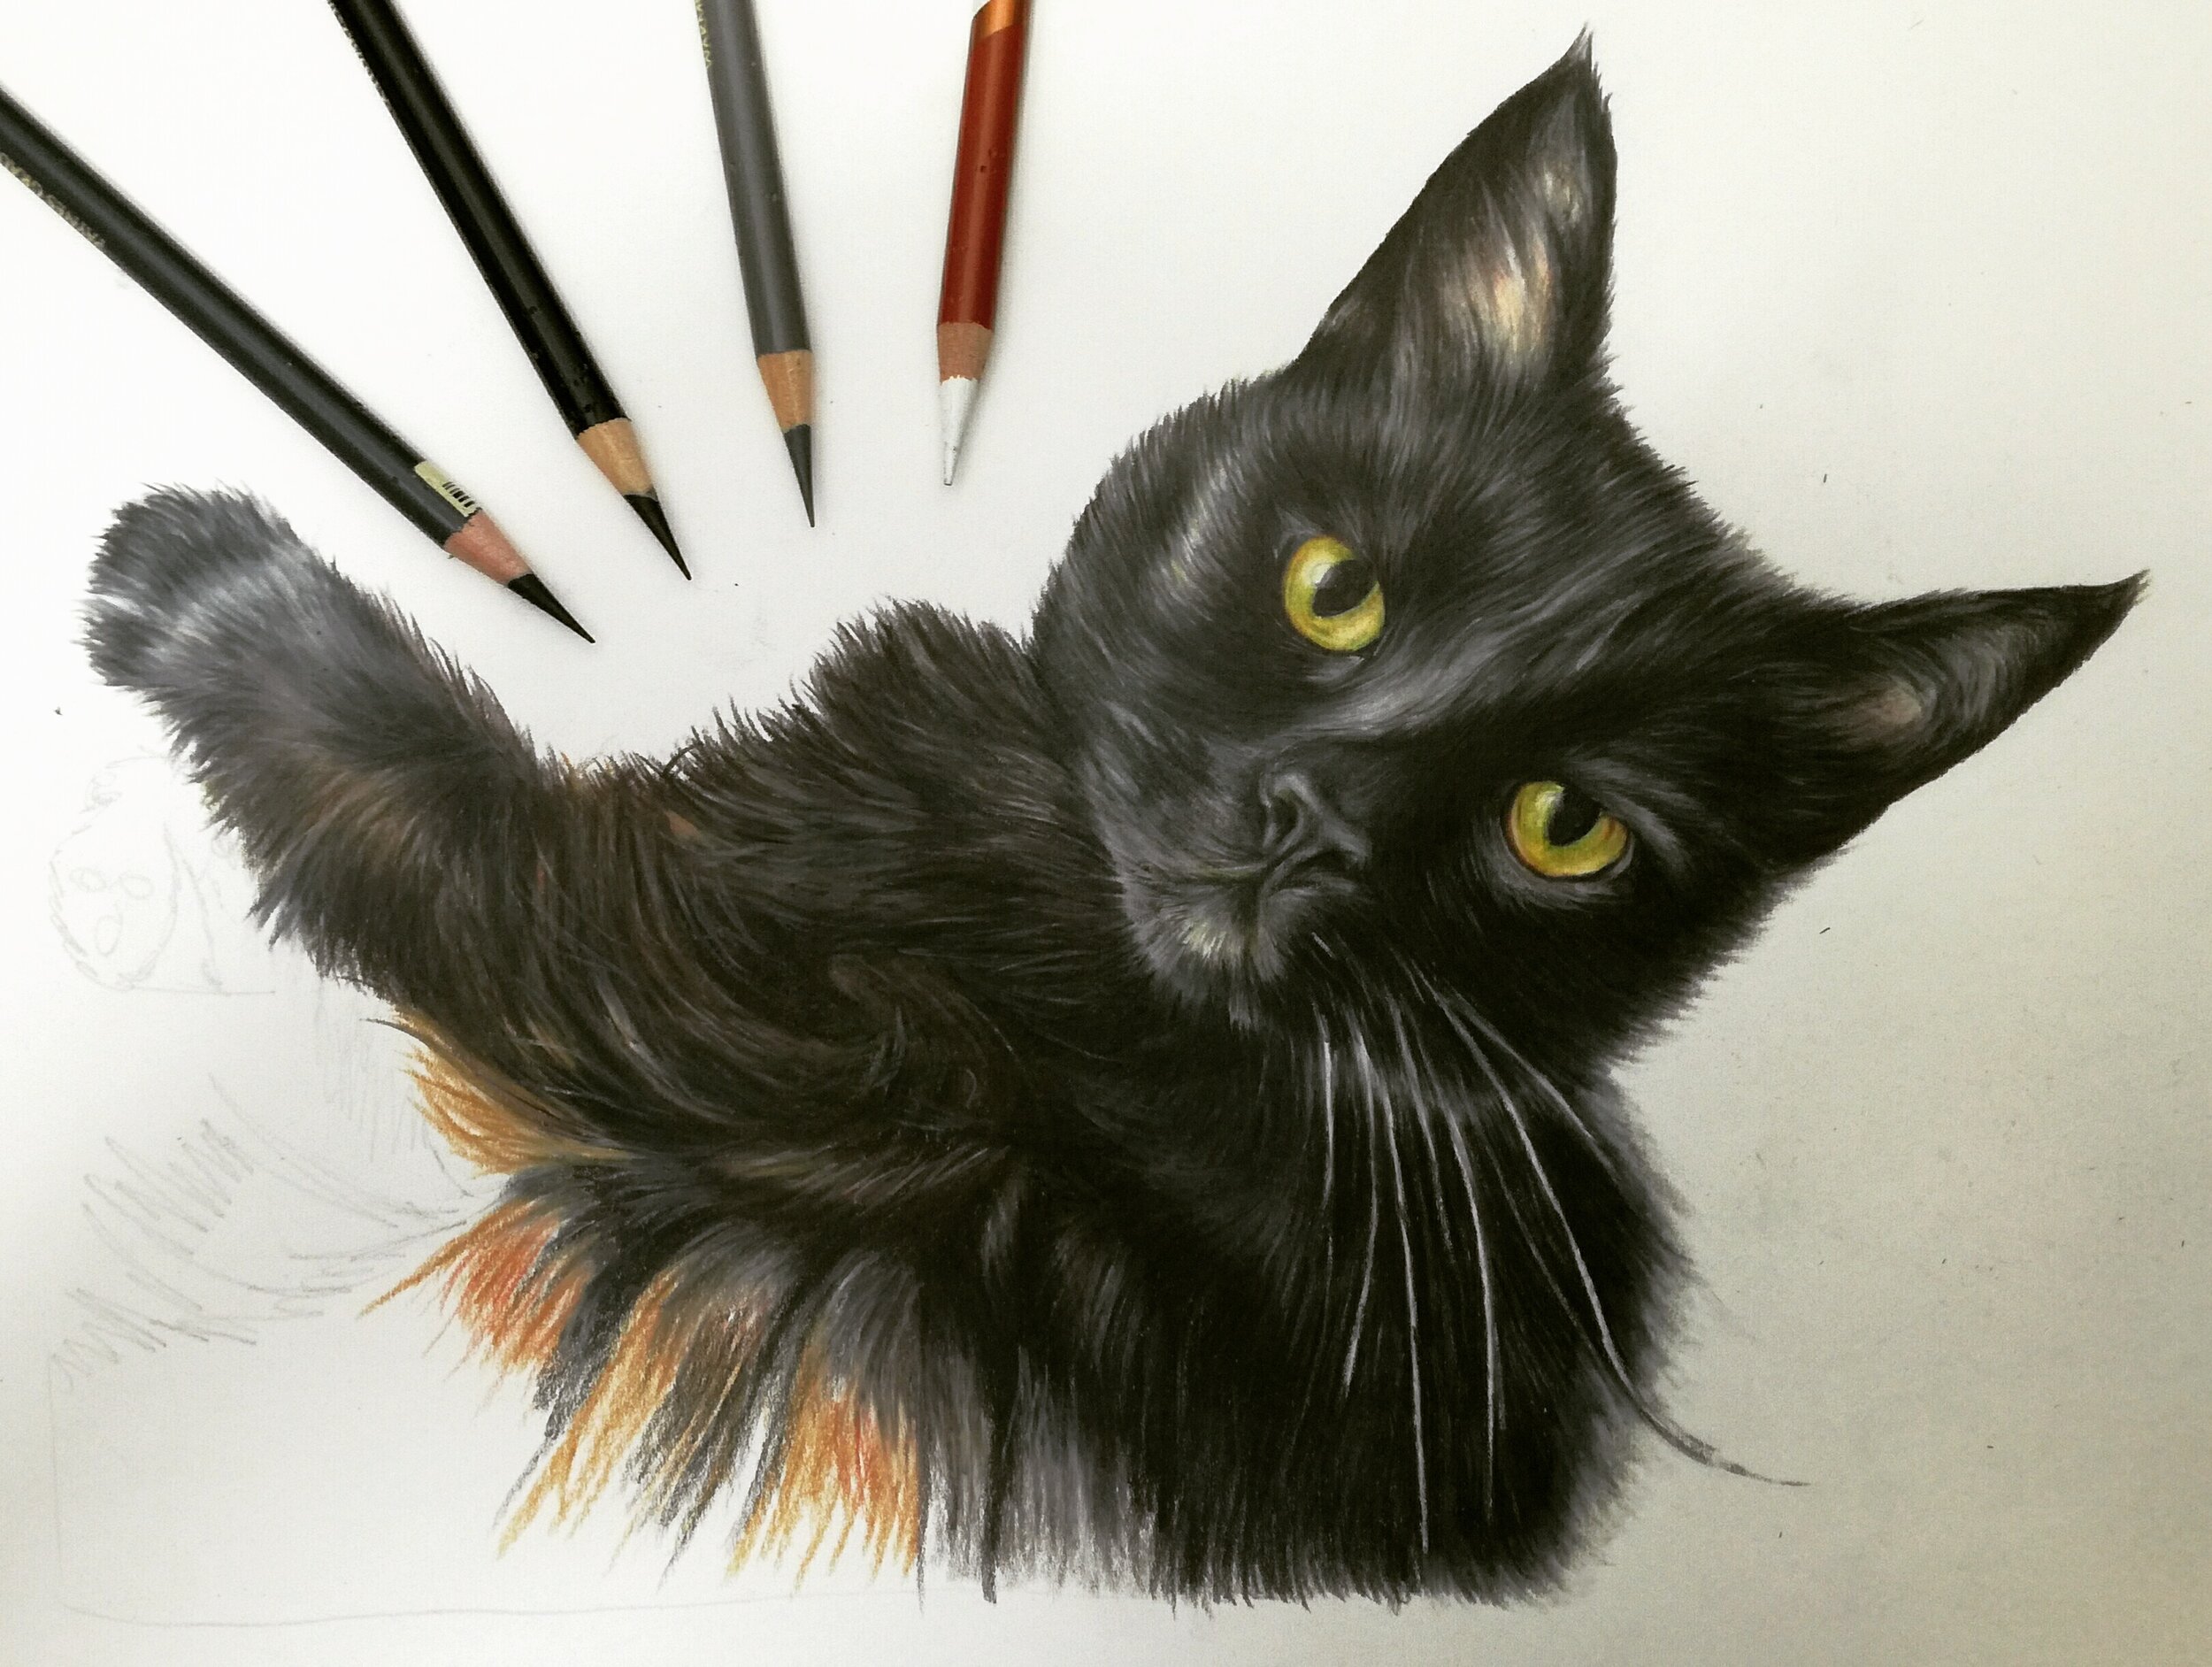 drawing of a black cat called Piggy by artist sema martin